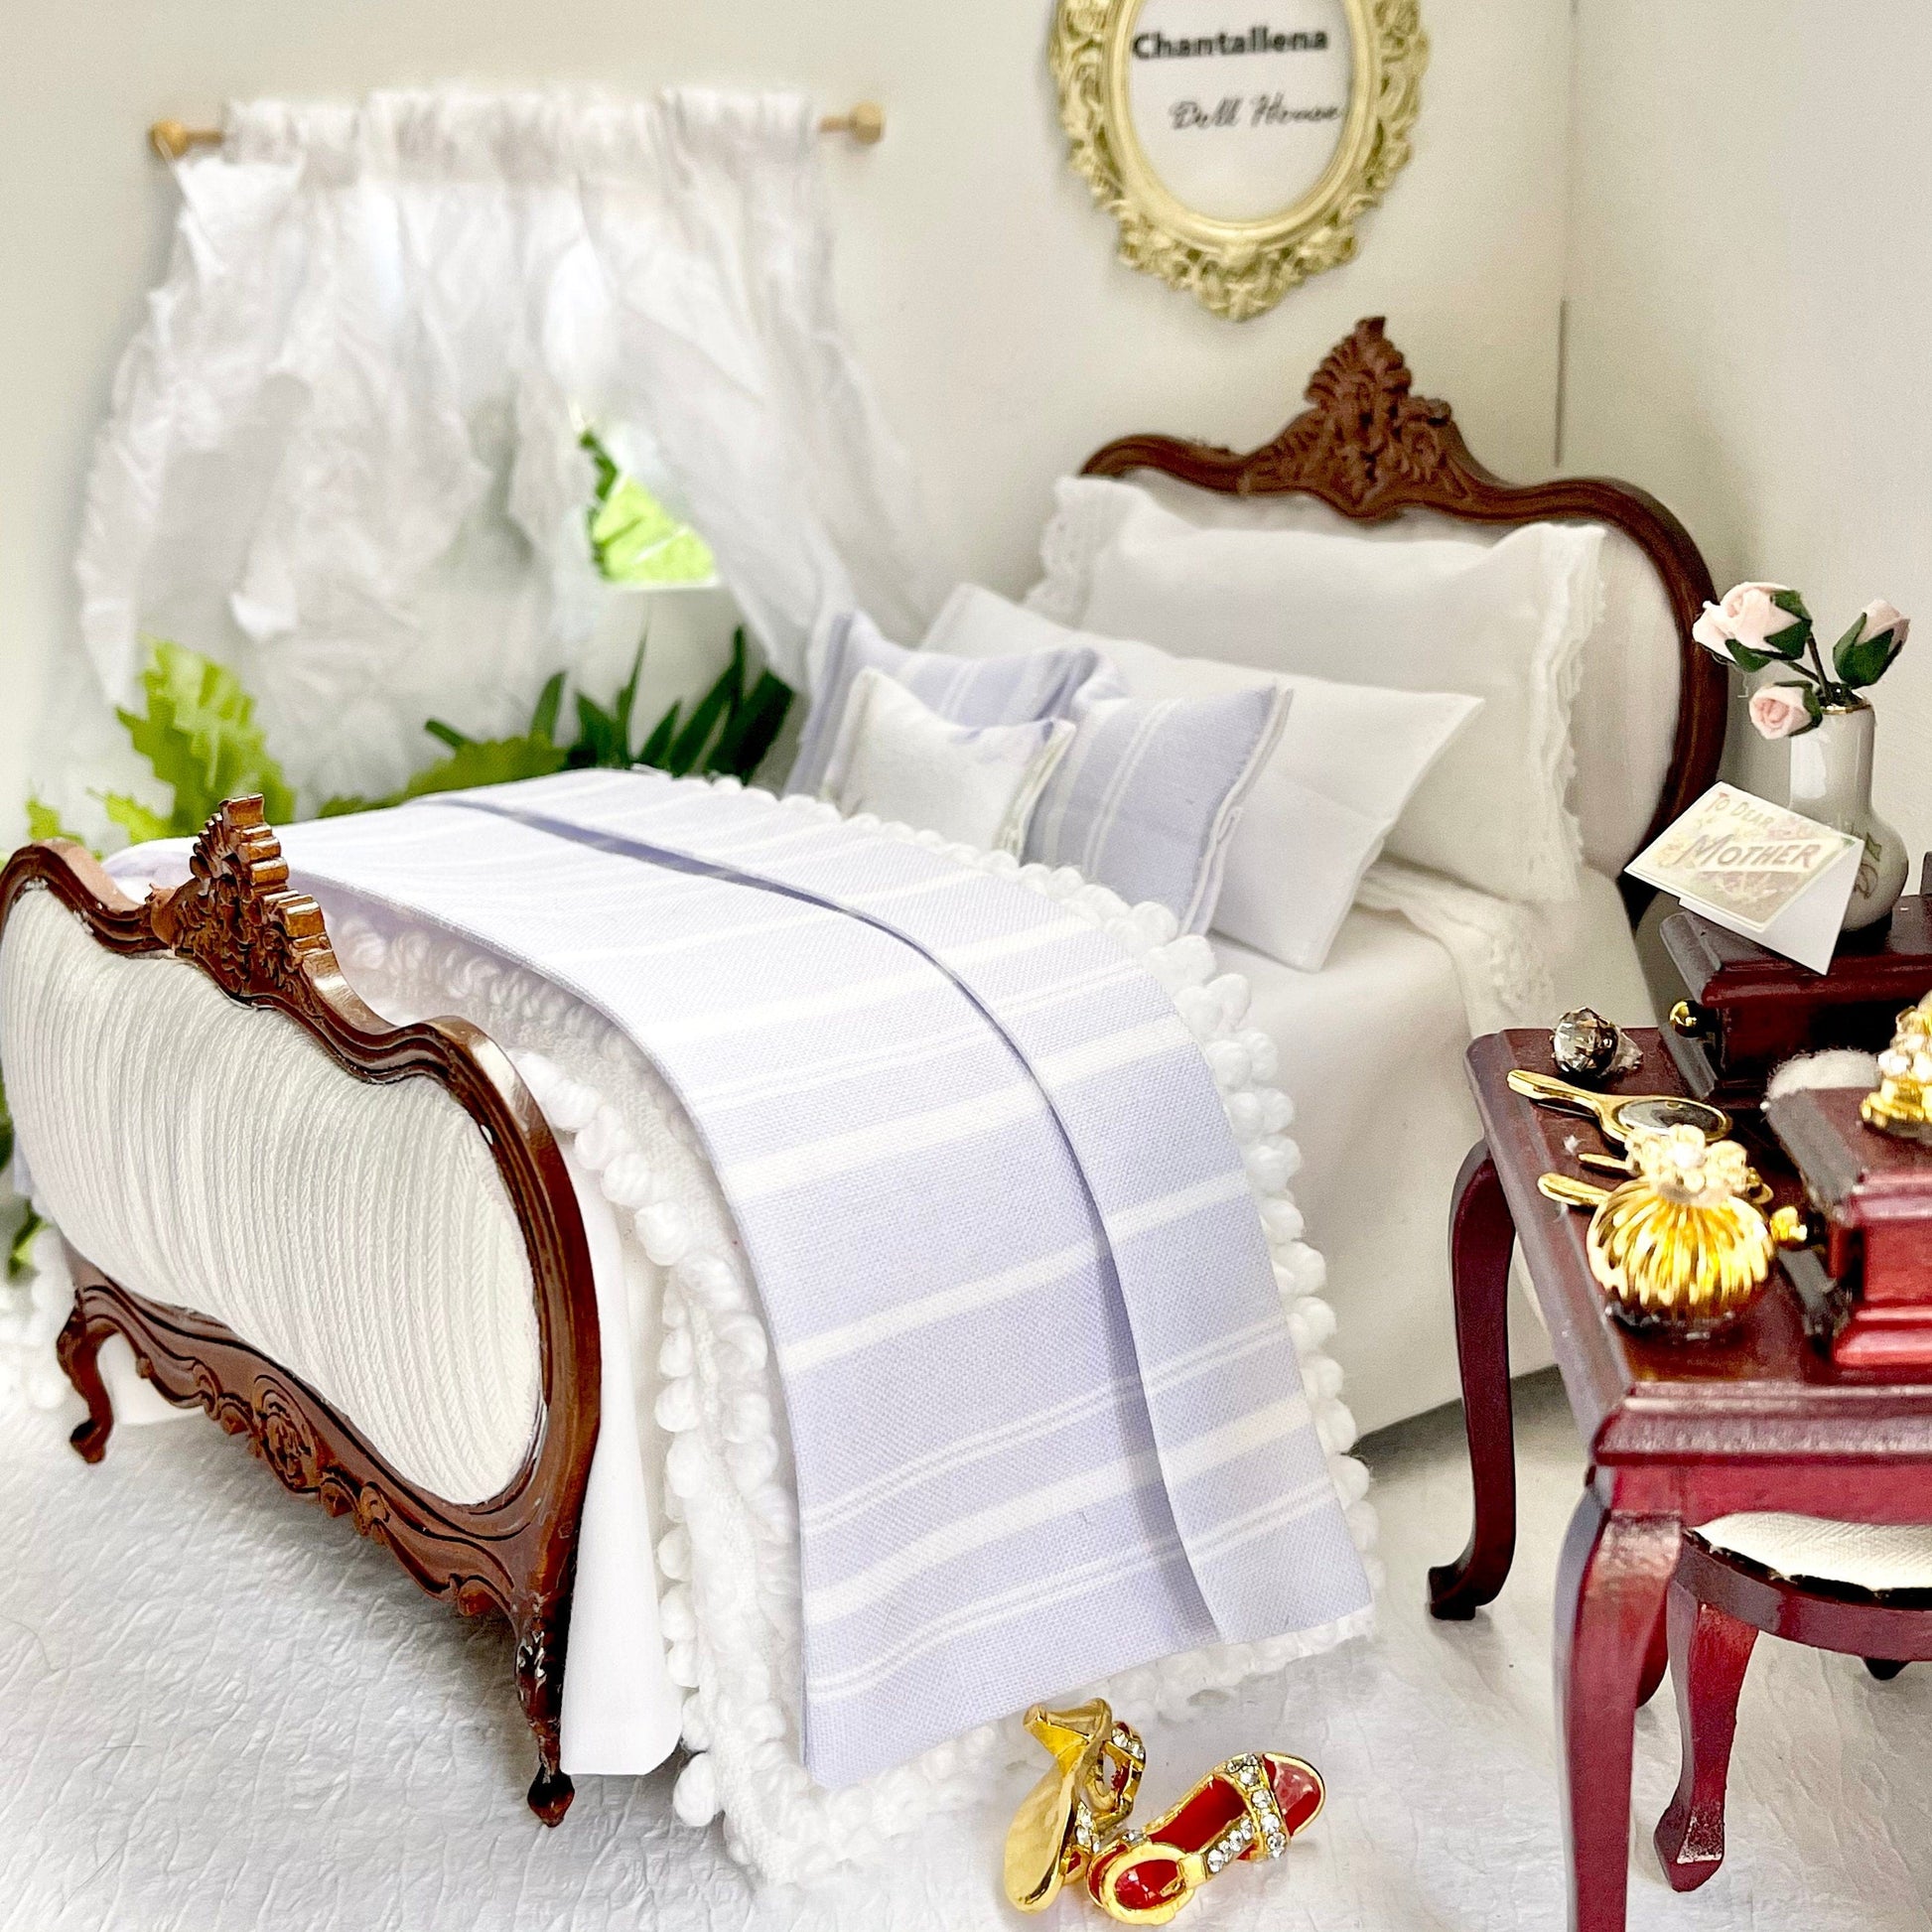 Chantallena Doll House single Shabby Cottage - Eight Piece Shabby White Cotton Bedding Set with Lavender Striped Bed Runner